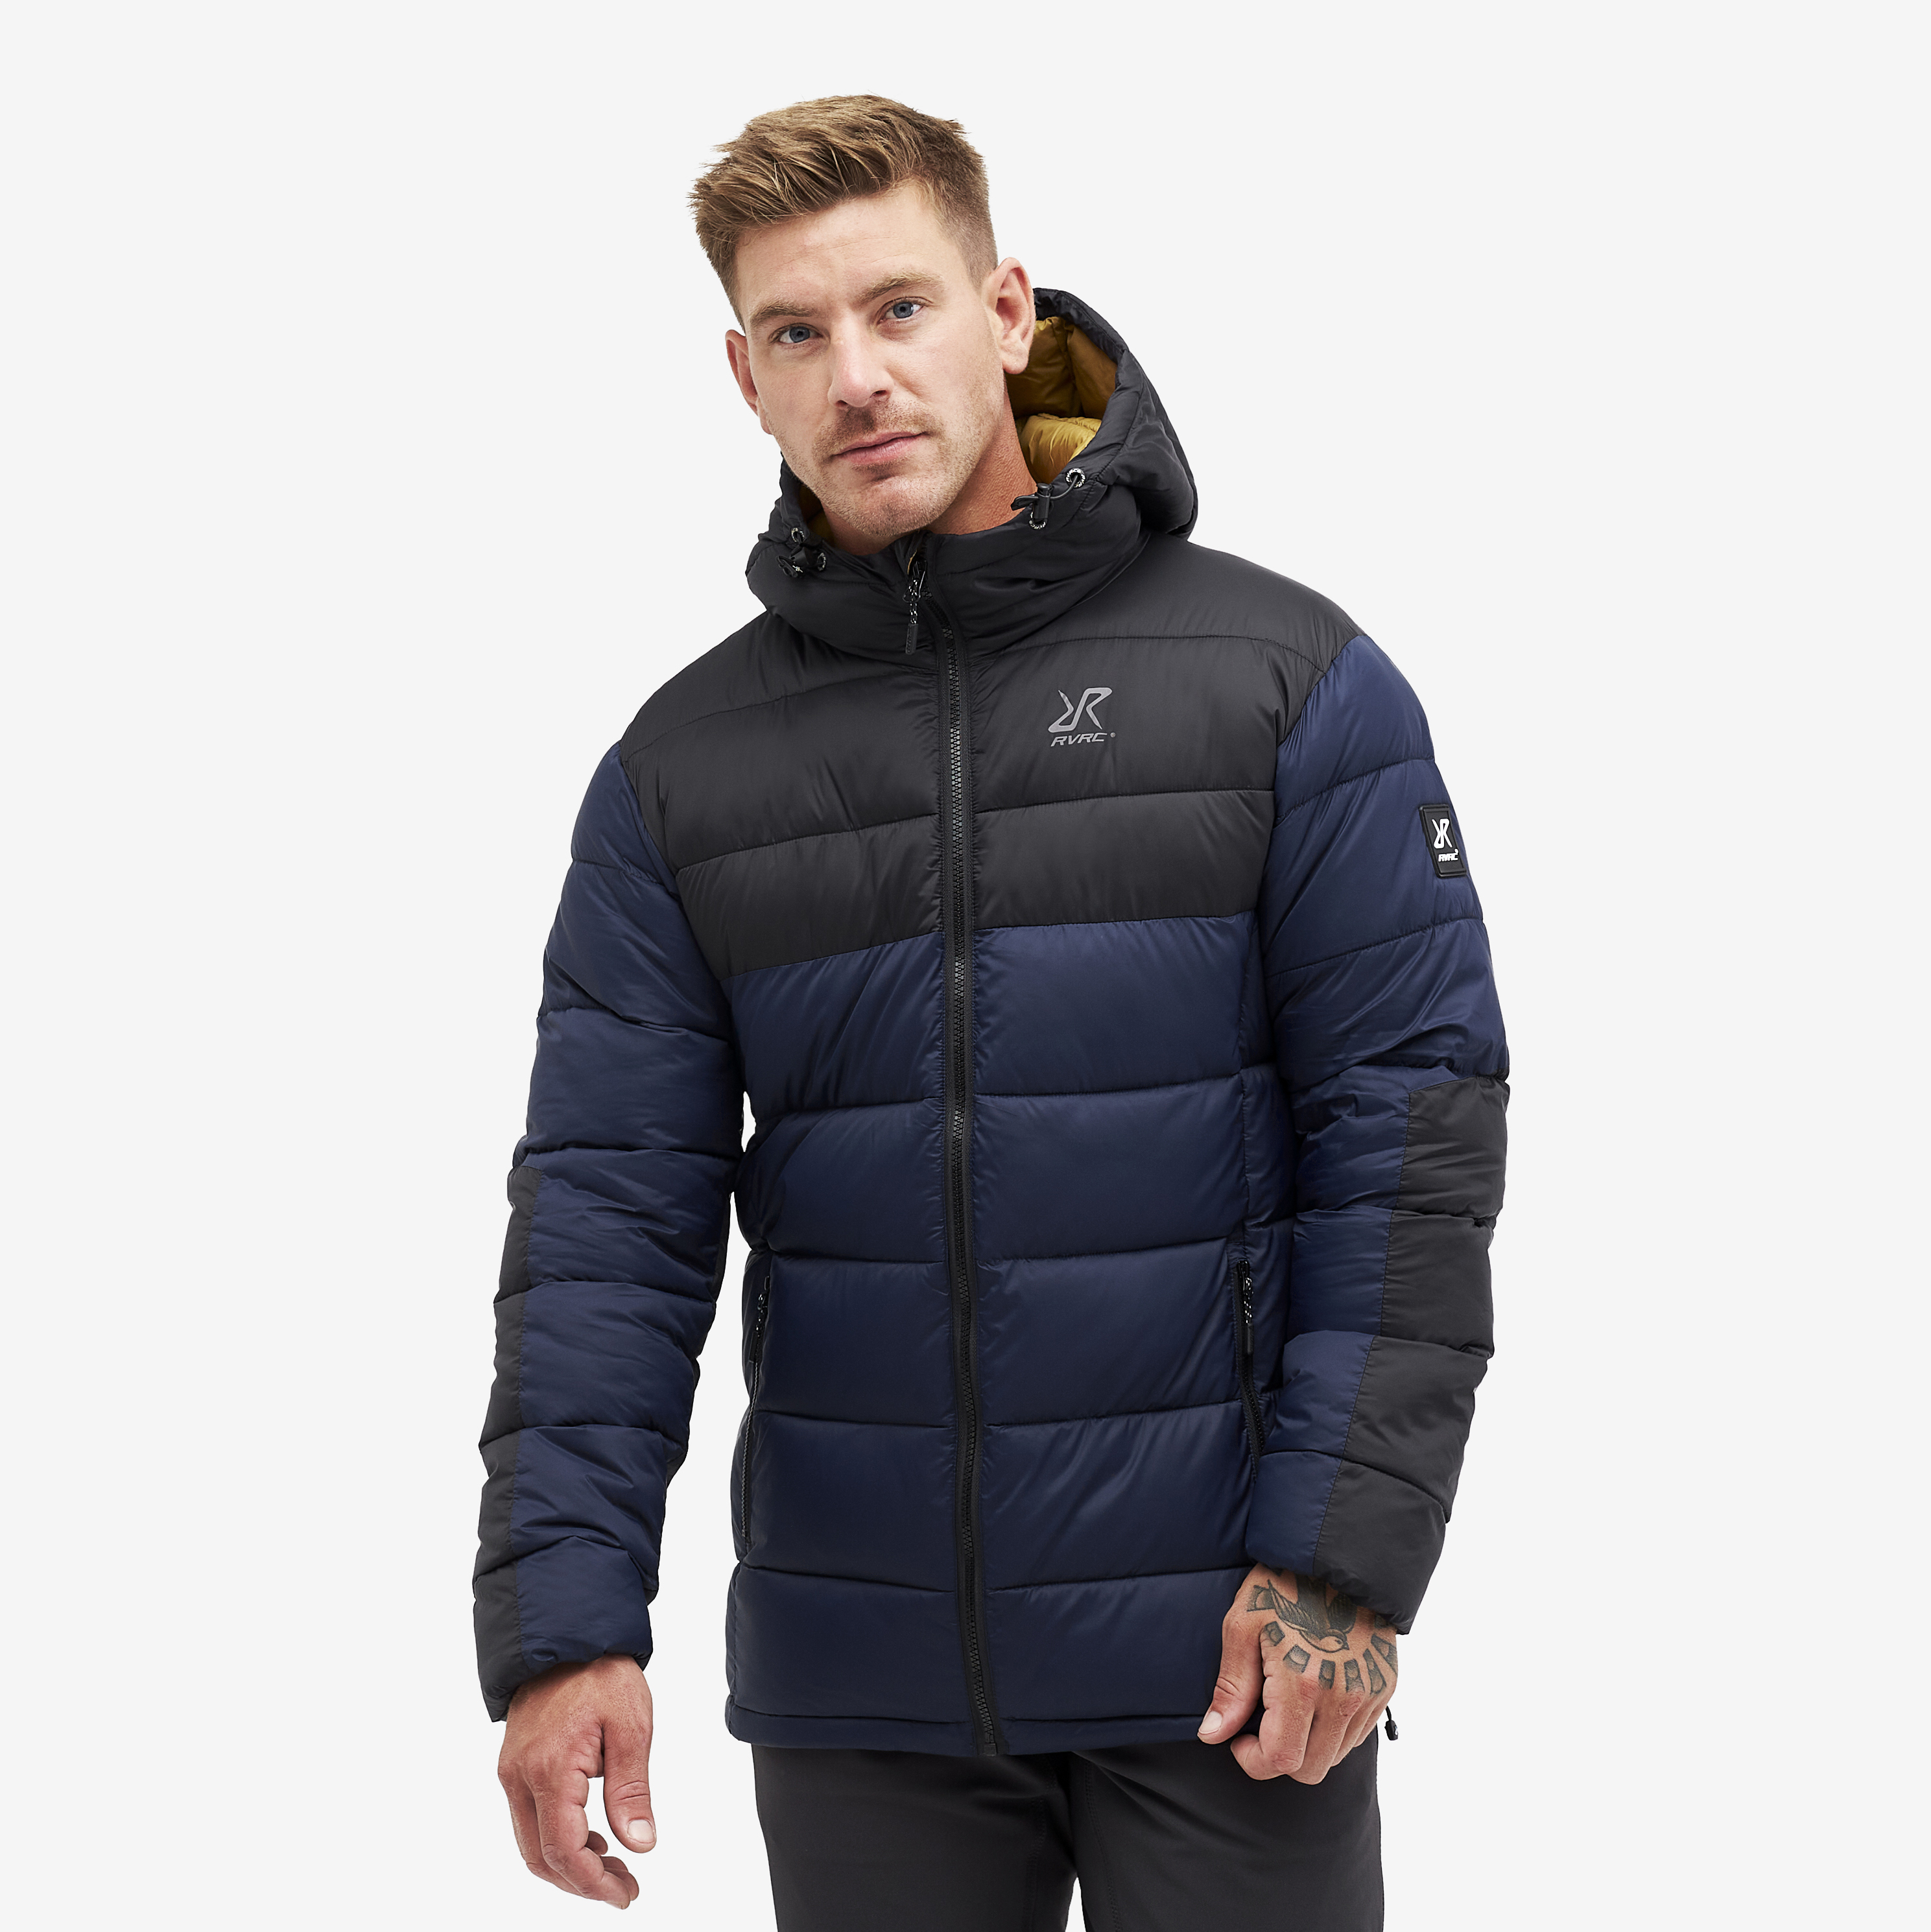 Mongoose  Jacket Navy Hombres